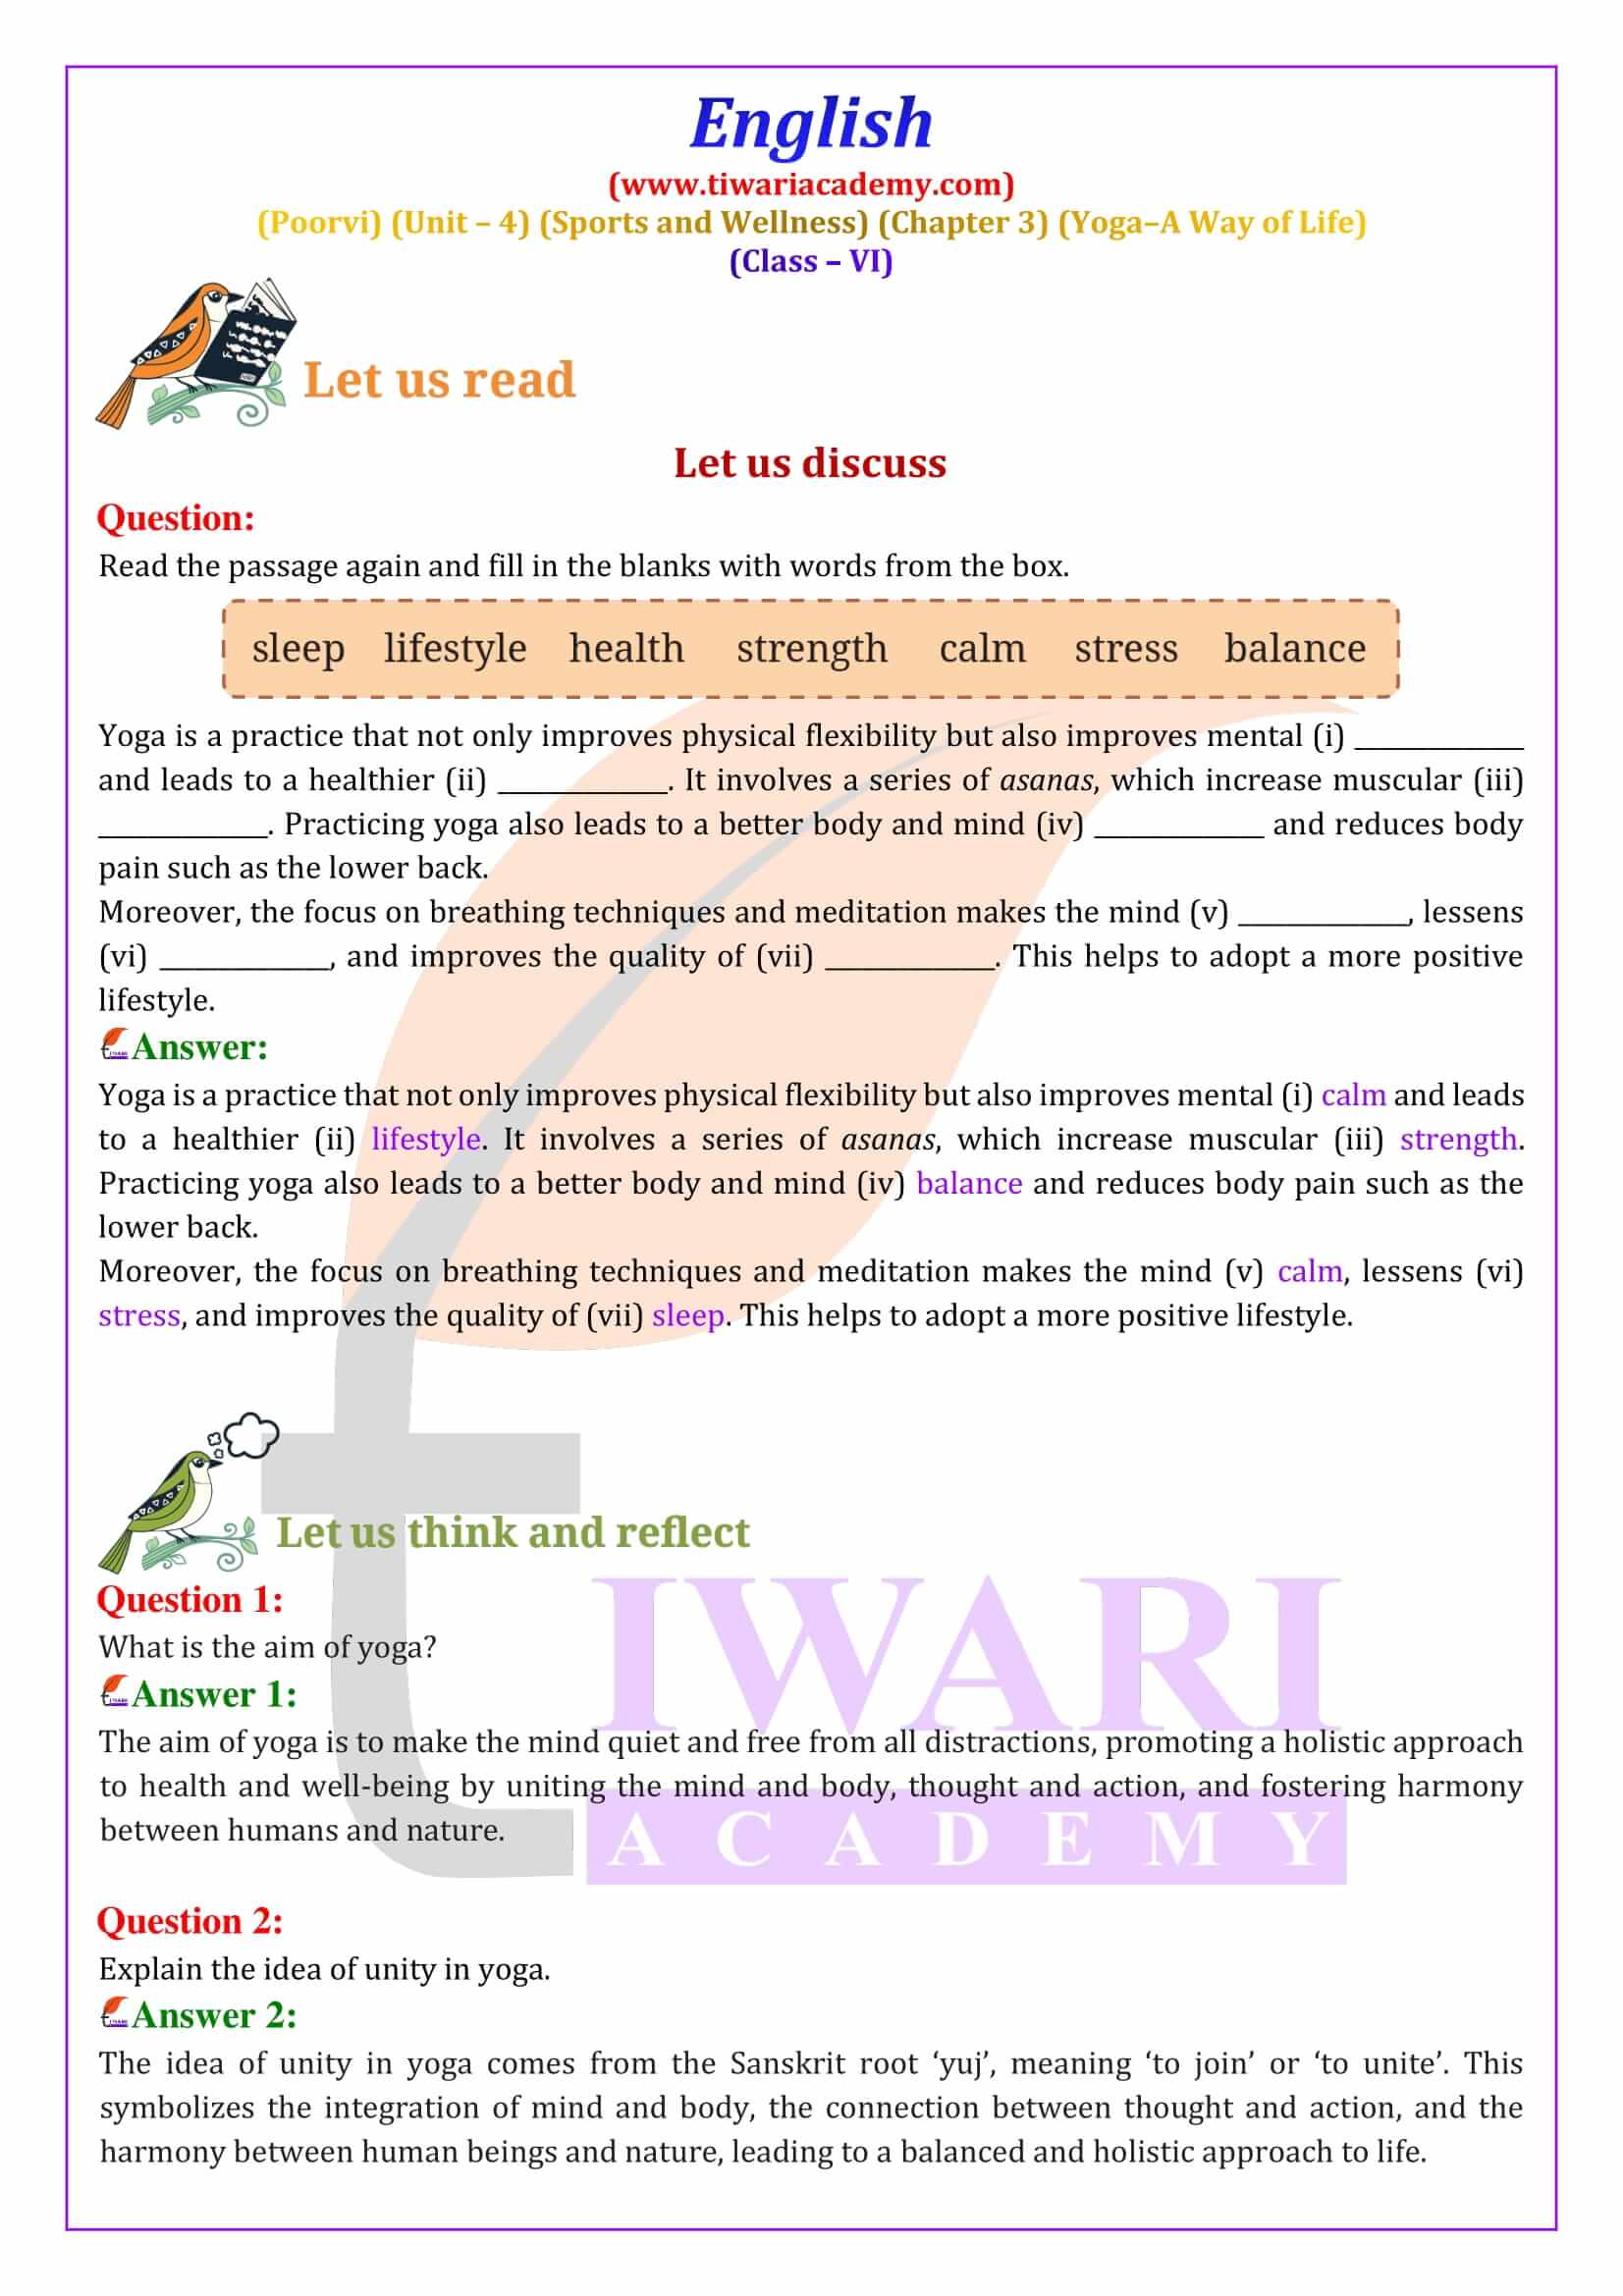 Class 6 English Poorvi Unit 4 Sports and Wellness Chapter 3 Yoga - A Way of Life